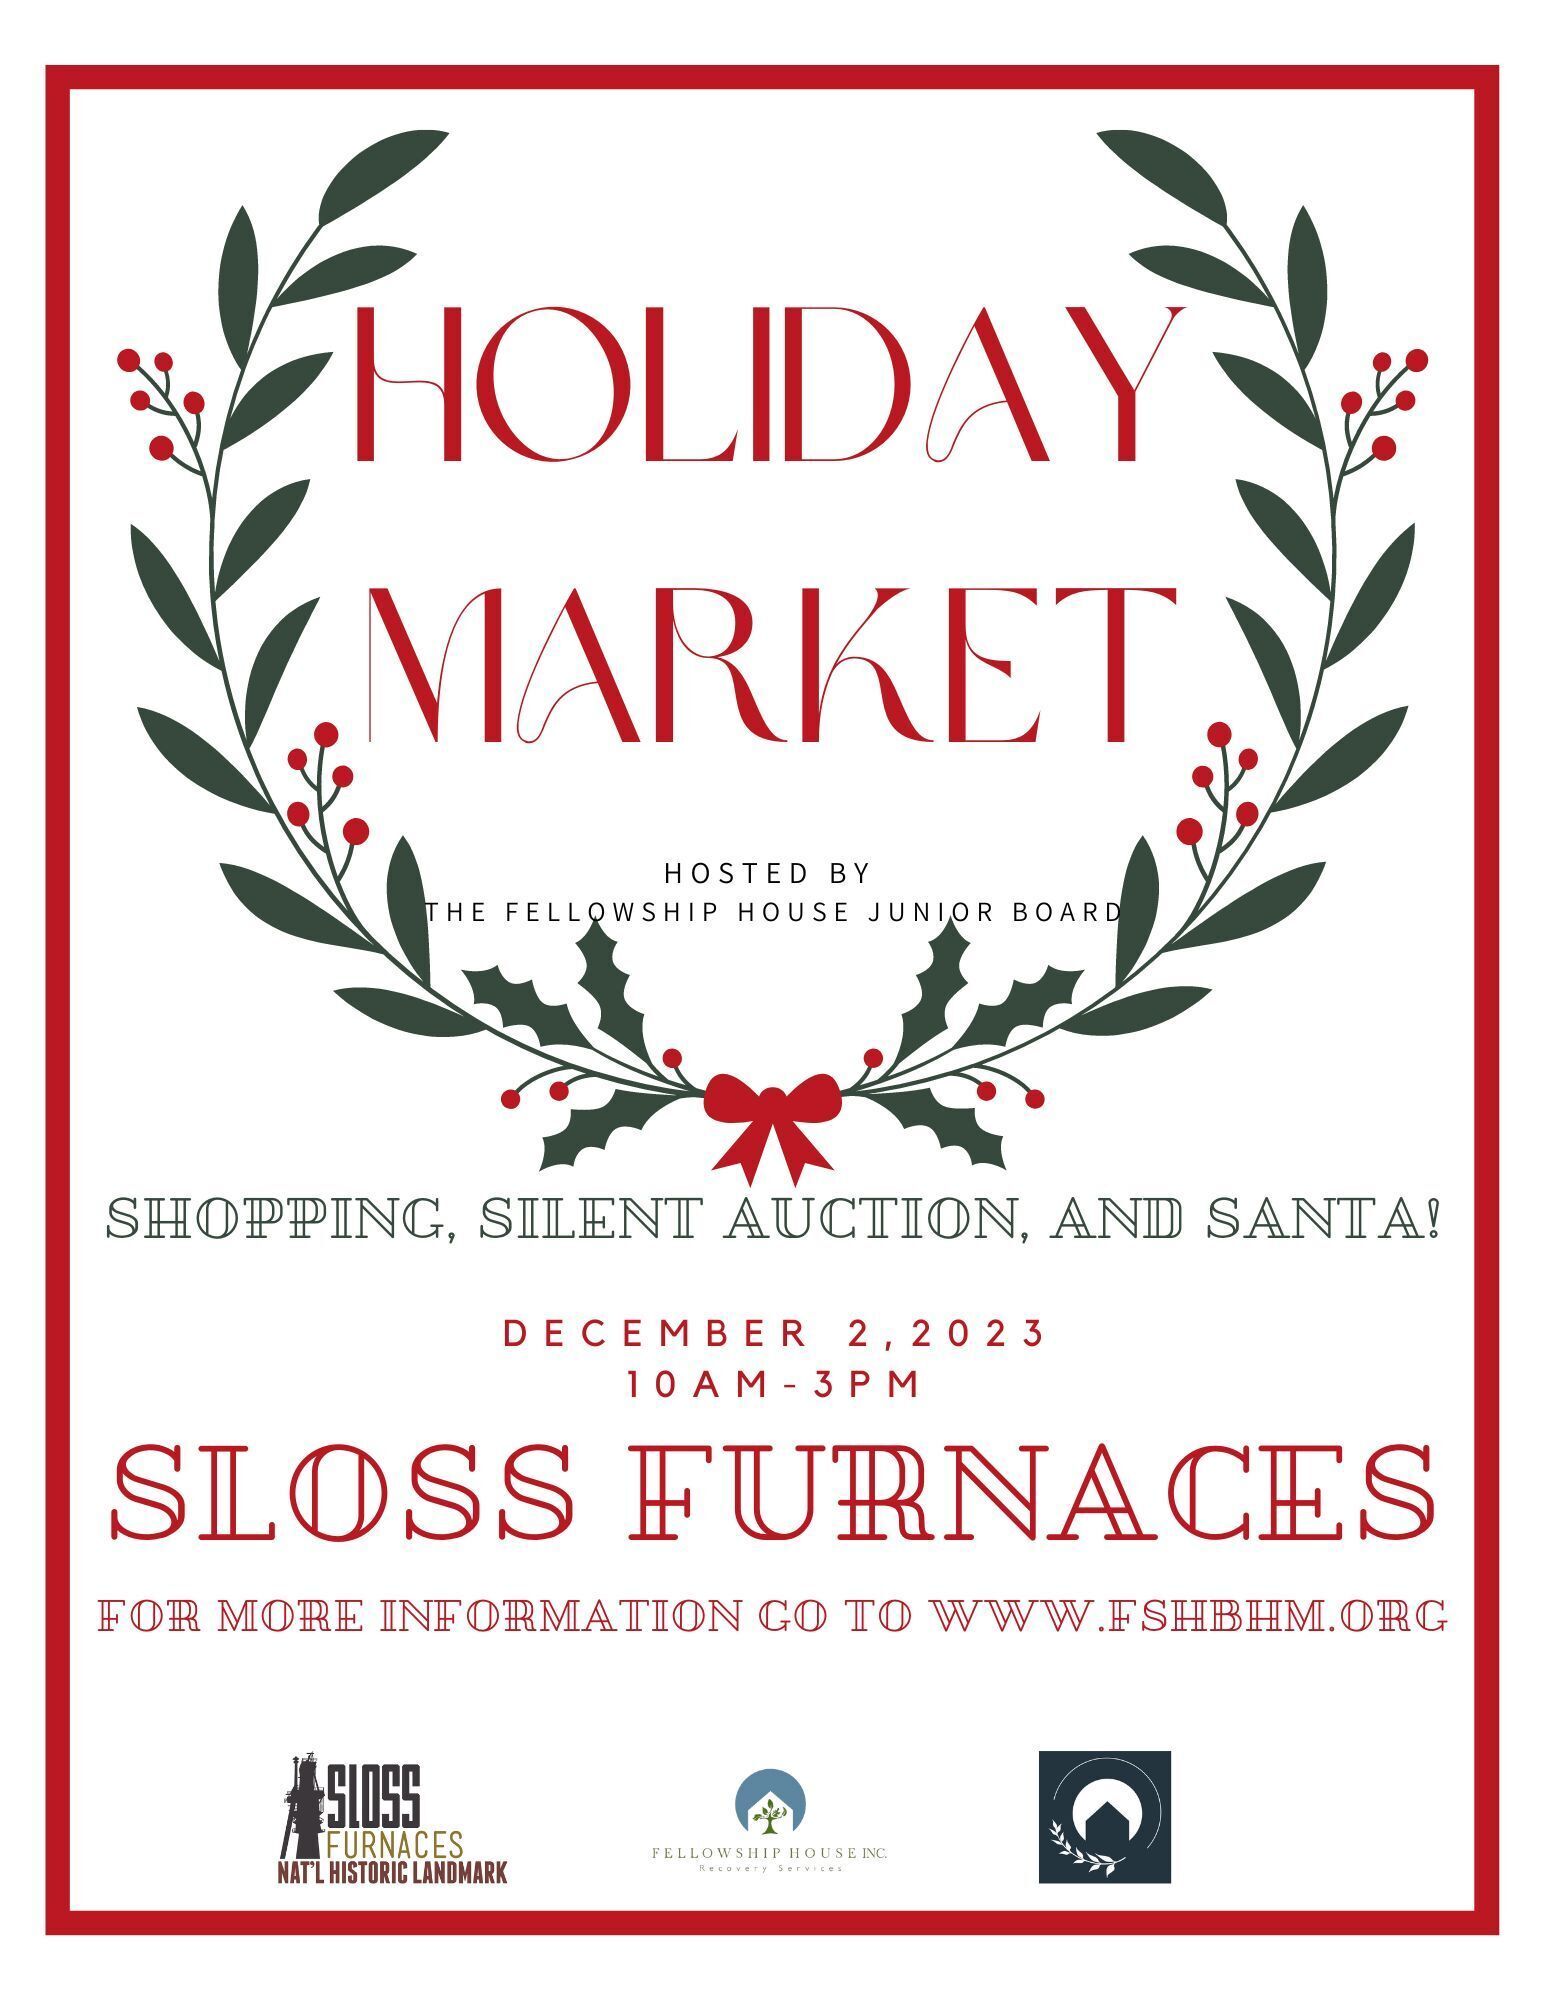 Join us for our Holiday Market!